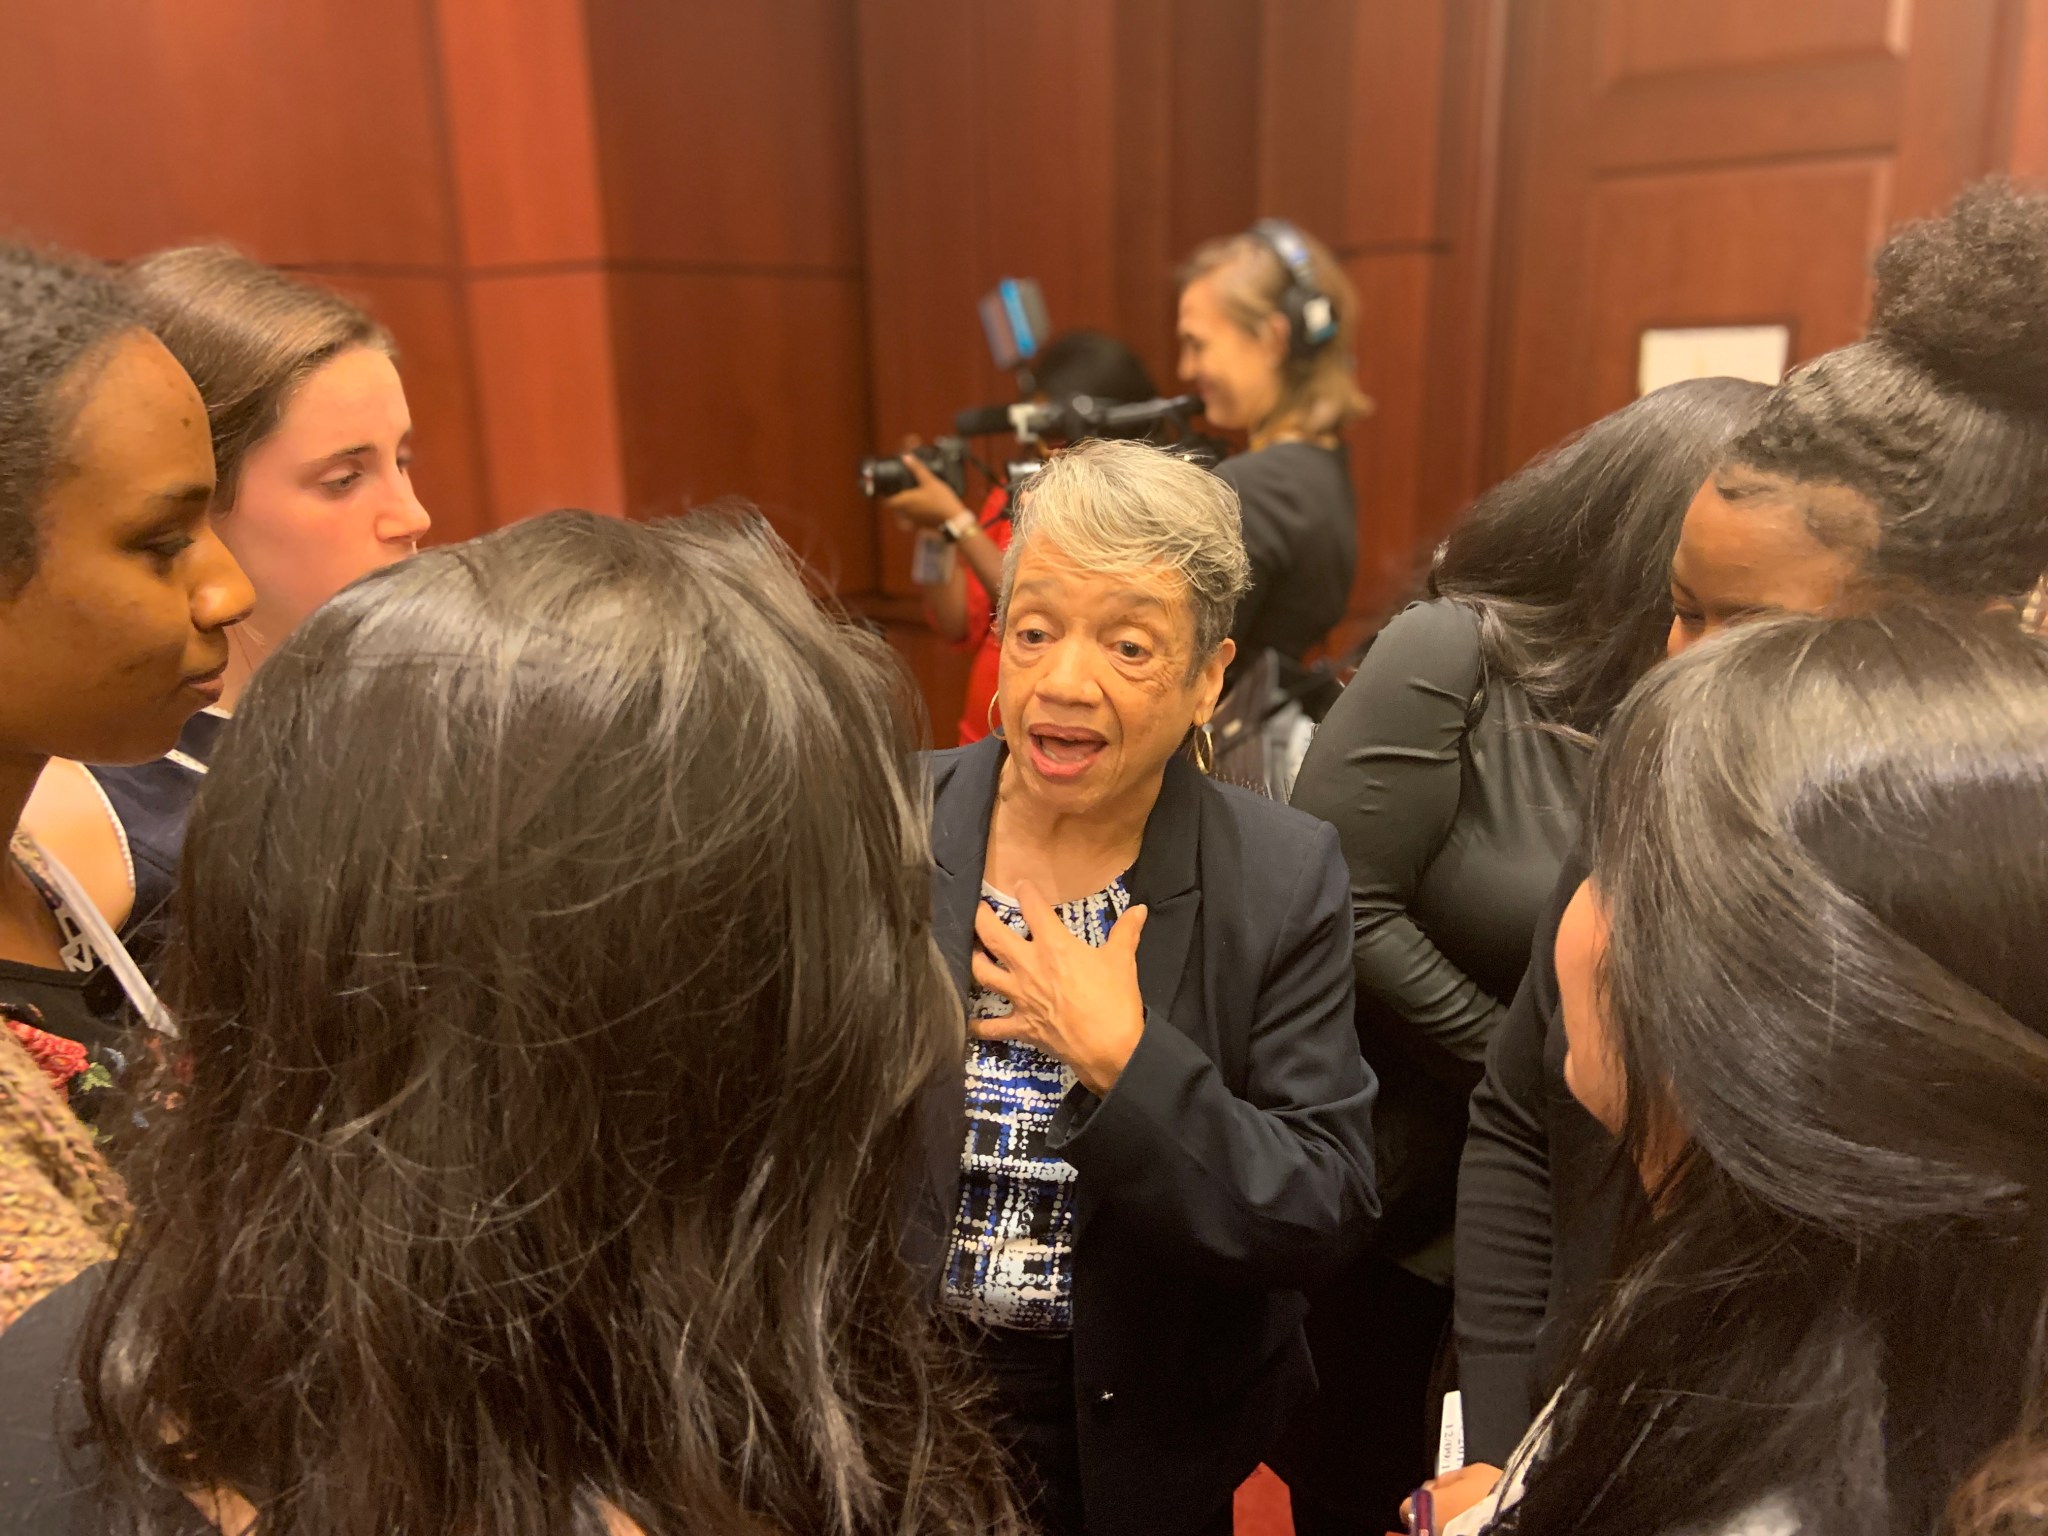 etired NASA aerospace engineer Dr. Christine Darden discusses STEM education with a group of female high schools student during a ceremony to honor the Hidden Figures Congressional Gold Medal Act.